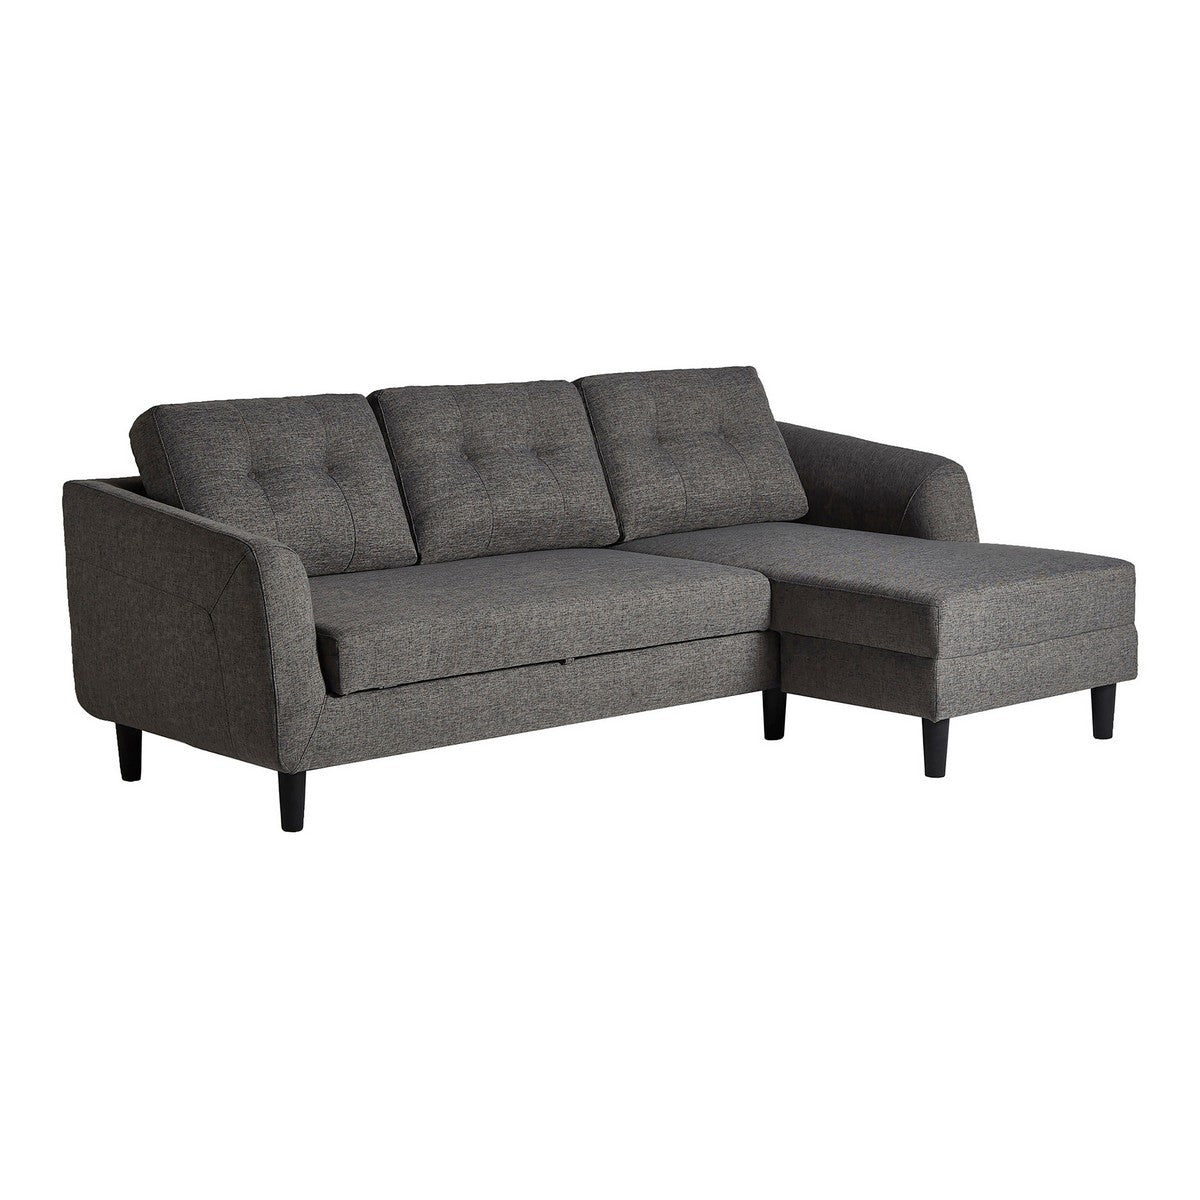 Moe's Home Collection Belagio Sofa Bed With Chaise Charcoal Right - MT-1019-07-R - Moe's Home Collection - Sofa Beds - Minimal And Modern - 1